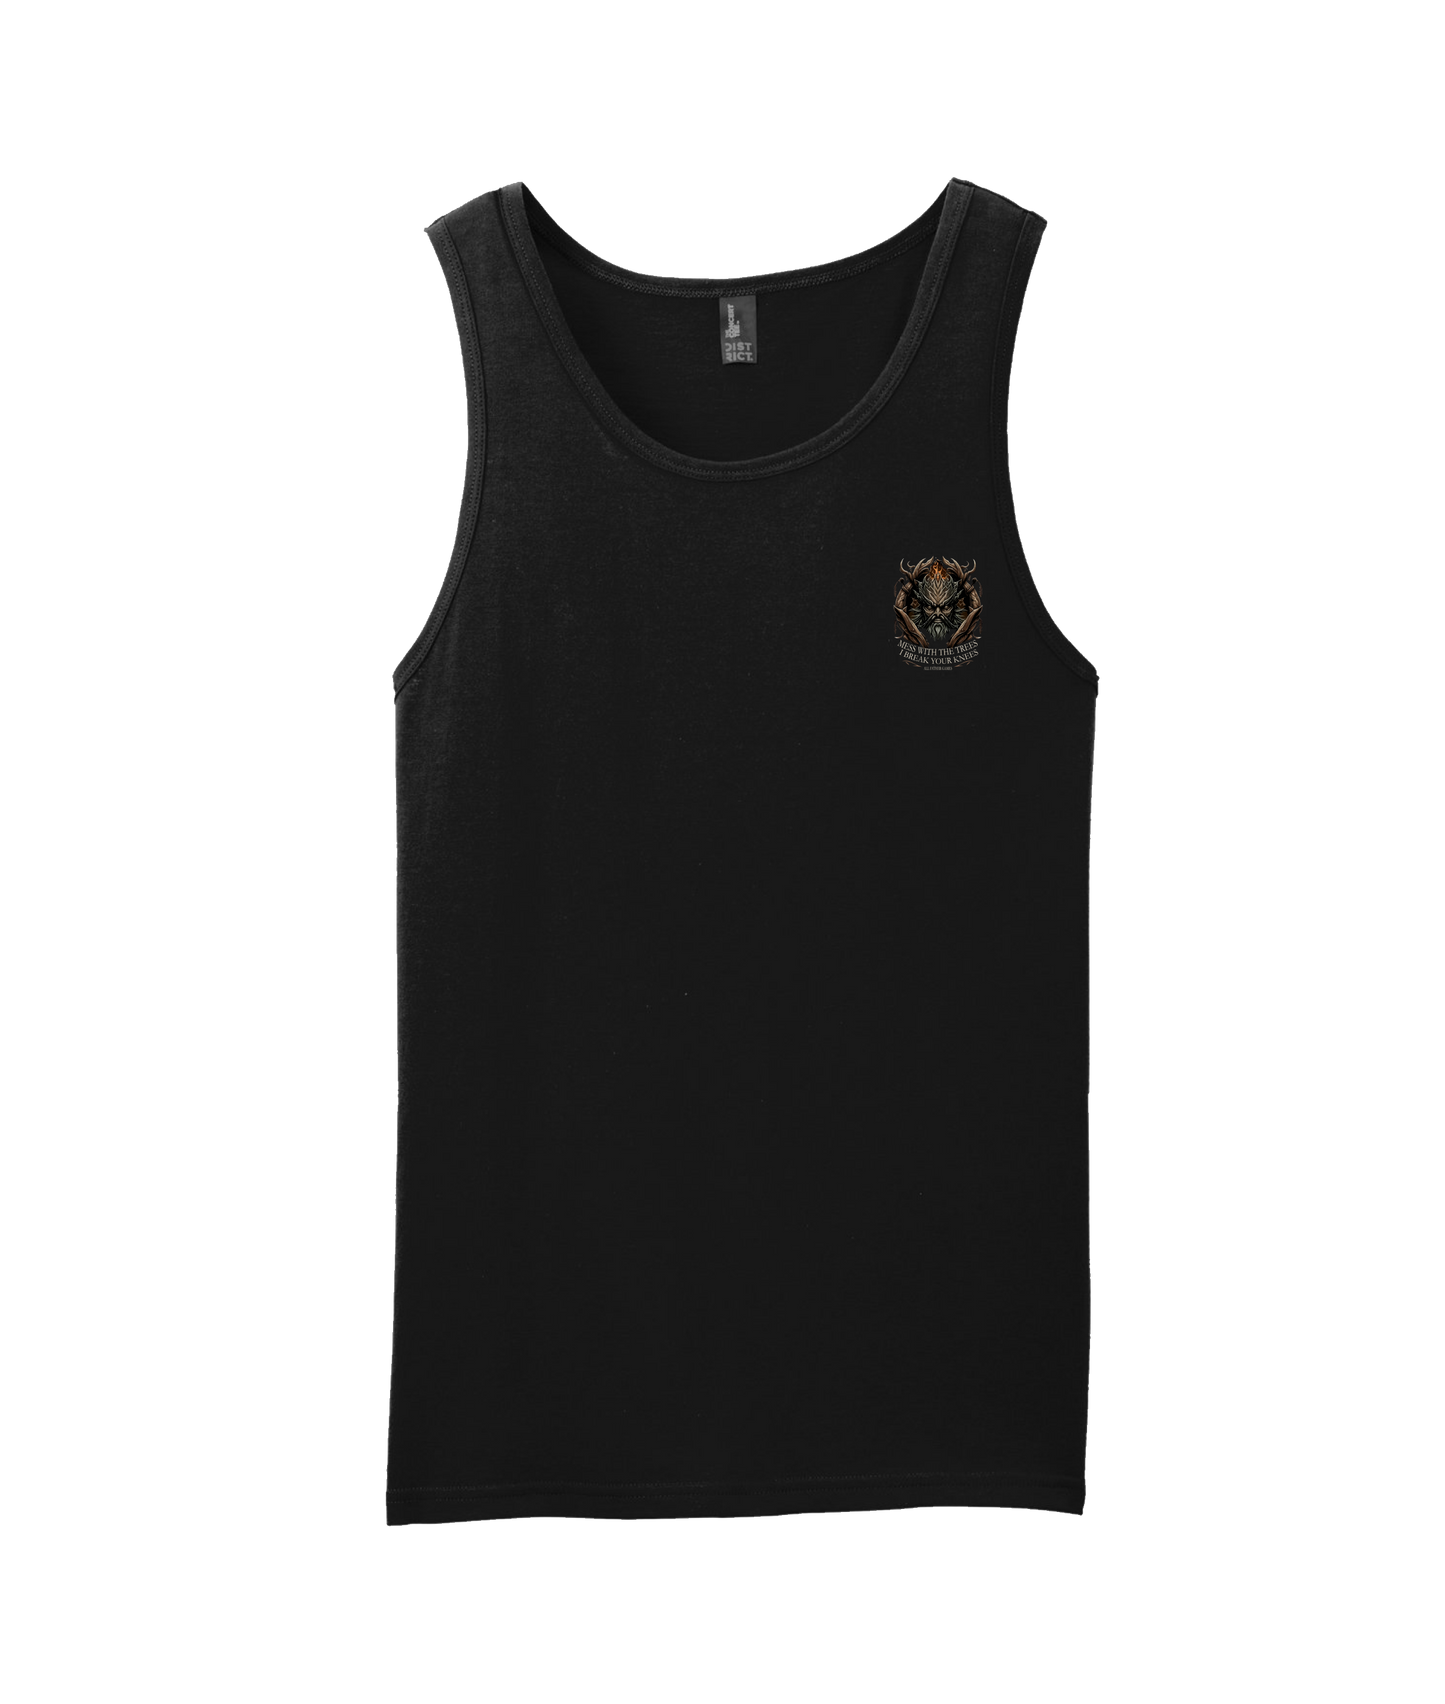 All Father Games - DON'T MESS WITH TREES - Black Tank Top